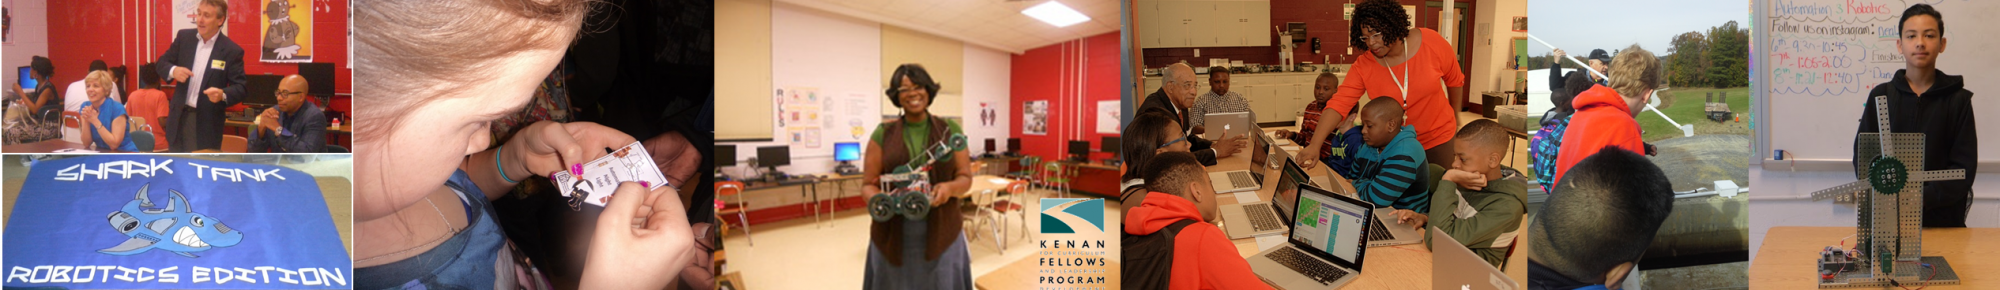 Lions, Tigers, & Kenan Fellows…Oh My!